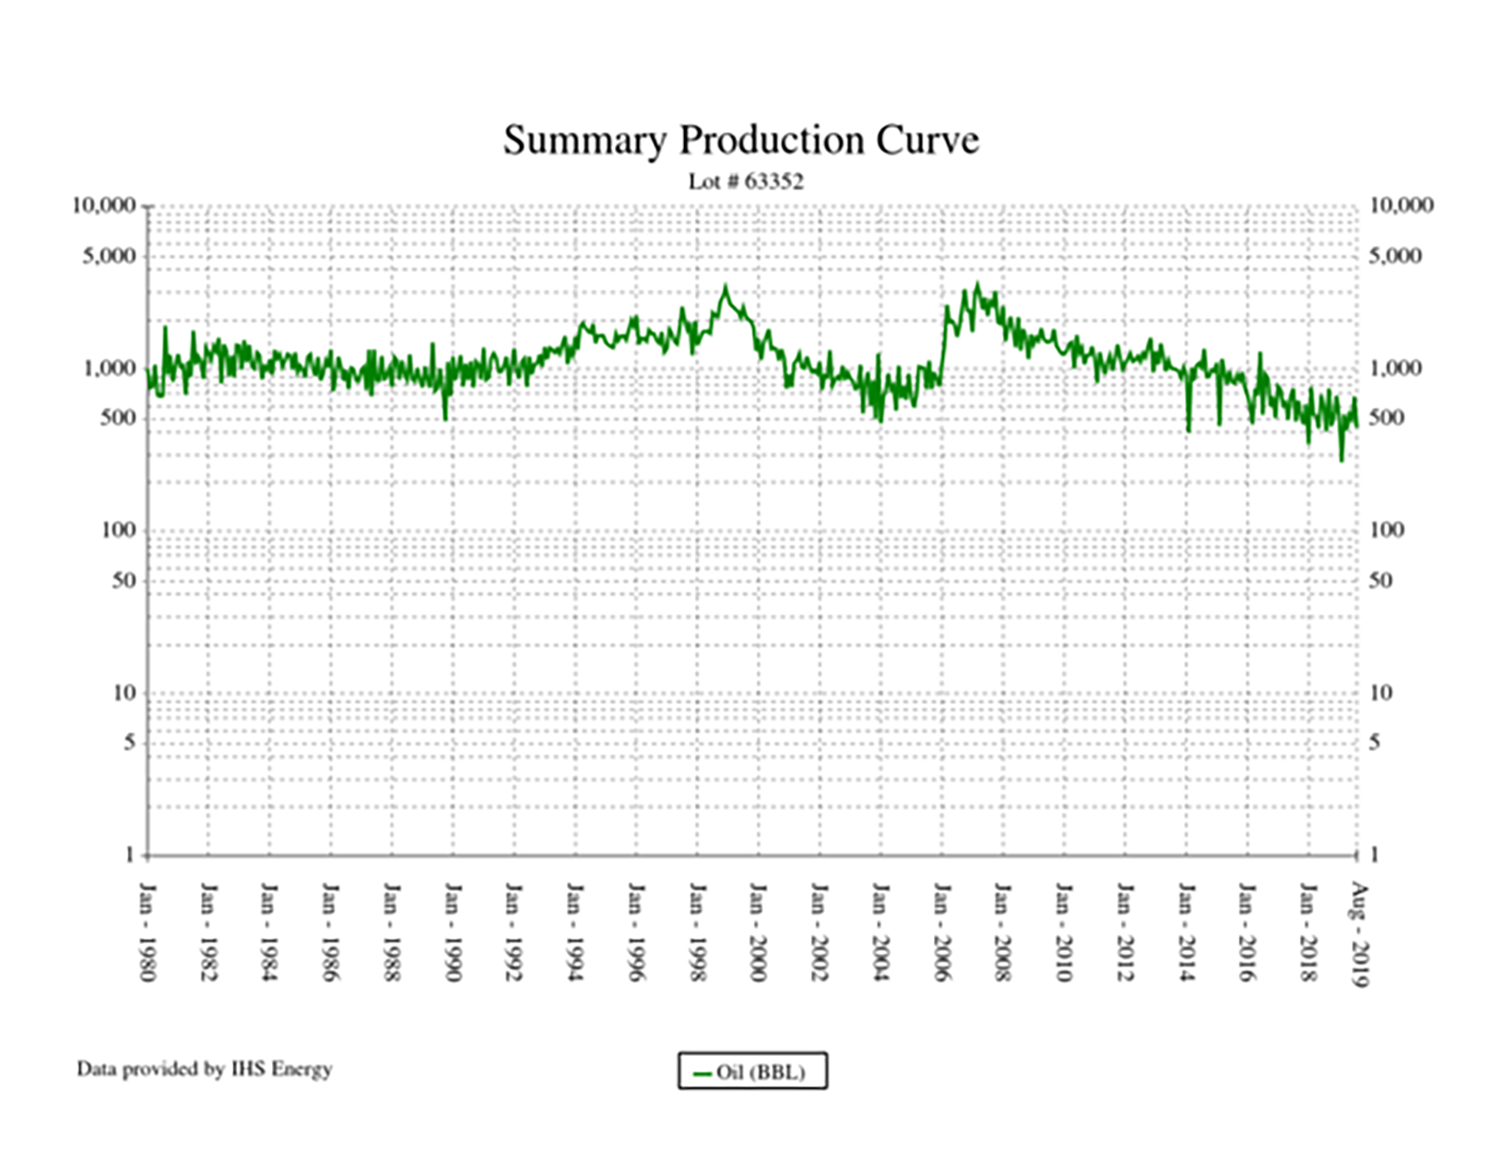 QEP Indiana Mineral, Royalty Package Production Curve Chart (Source: EnergyNet)